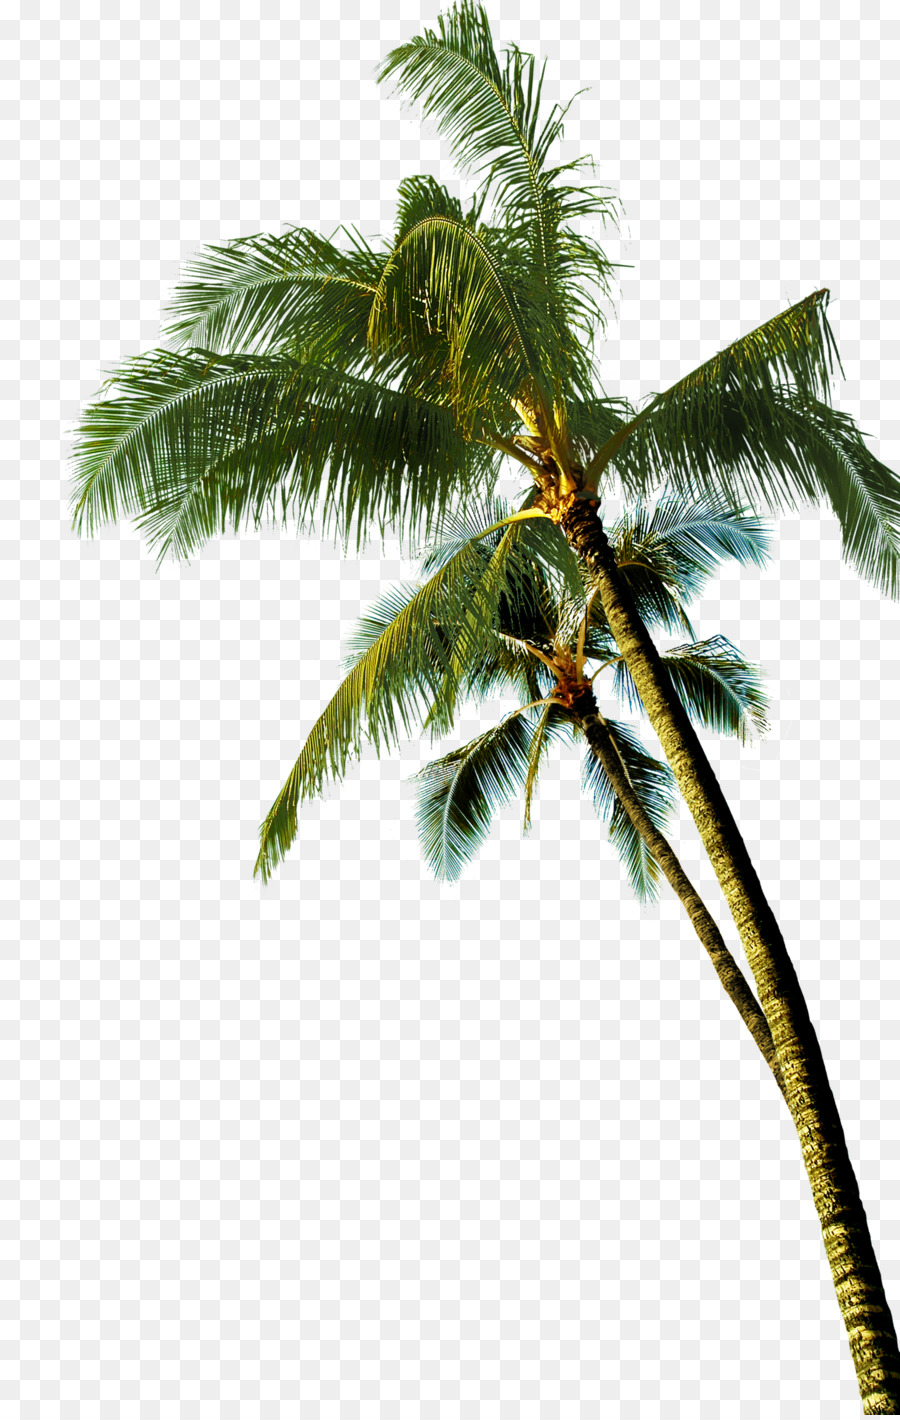 Coconut Asian palmyra palm Tree - coconut tree png download - 2036*3200 - Free Transparent Coconut png Download.